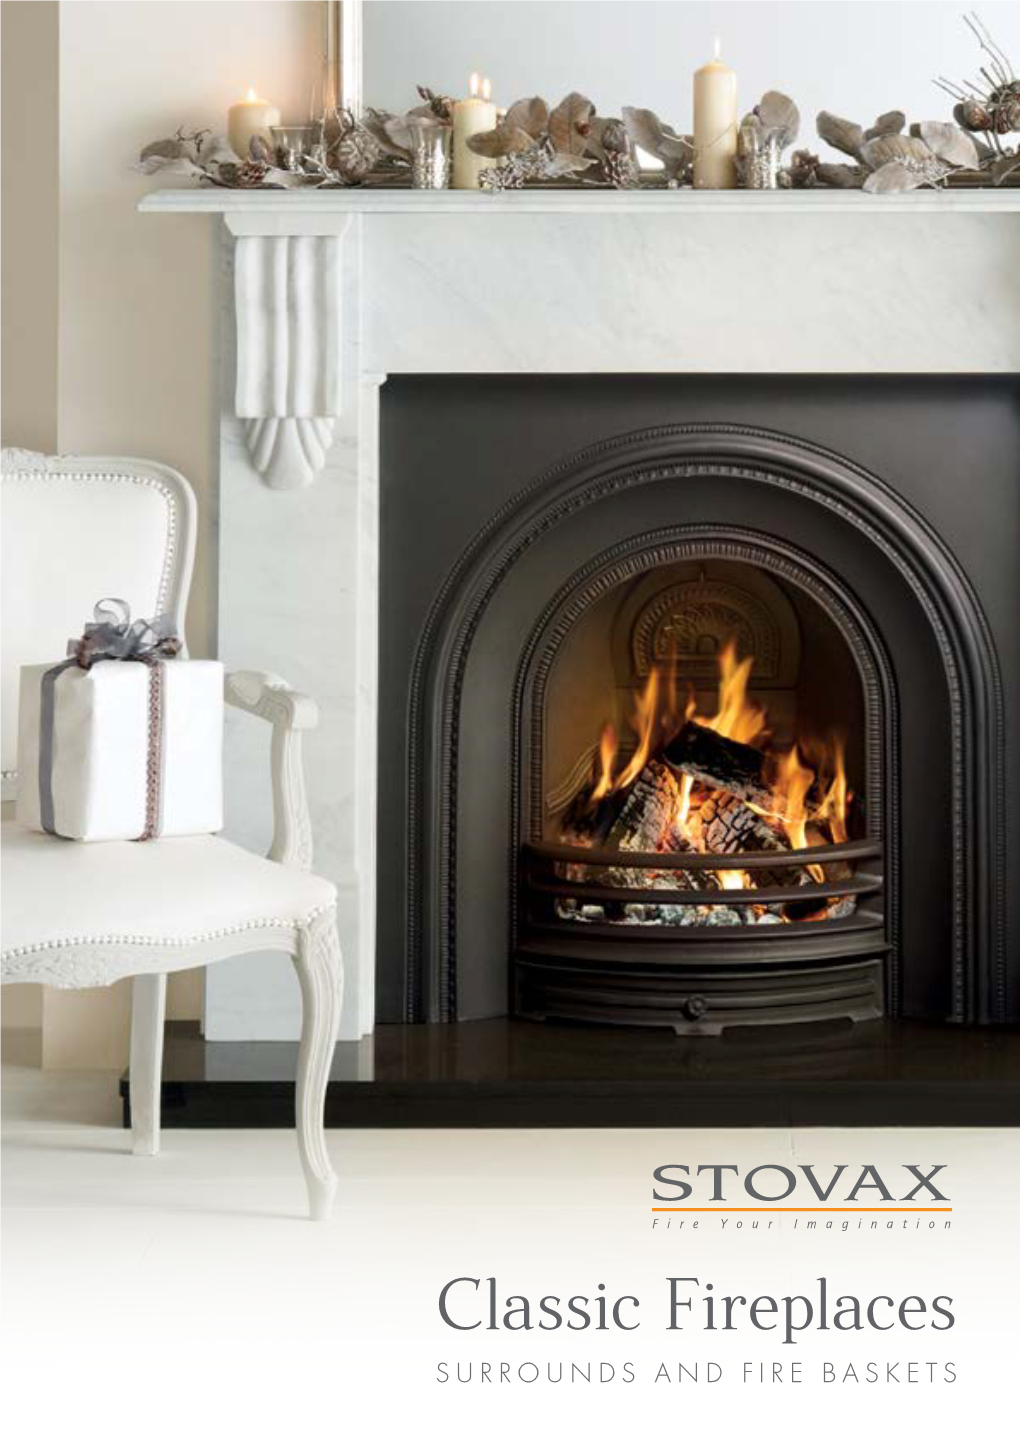 Stovax Classic Fireplace Is Available in the Traditional Imposing Matt Black of the Original Design